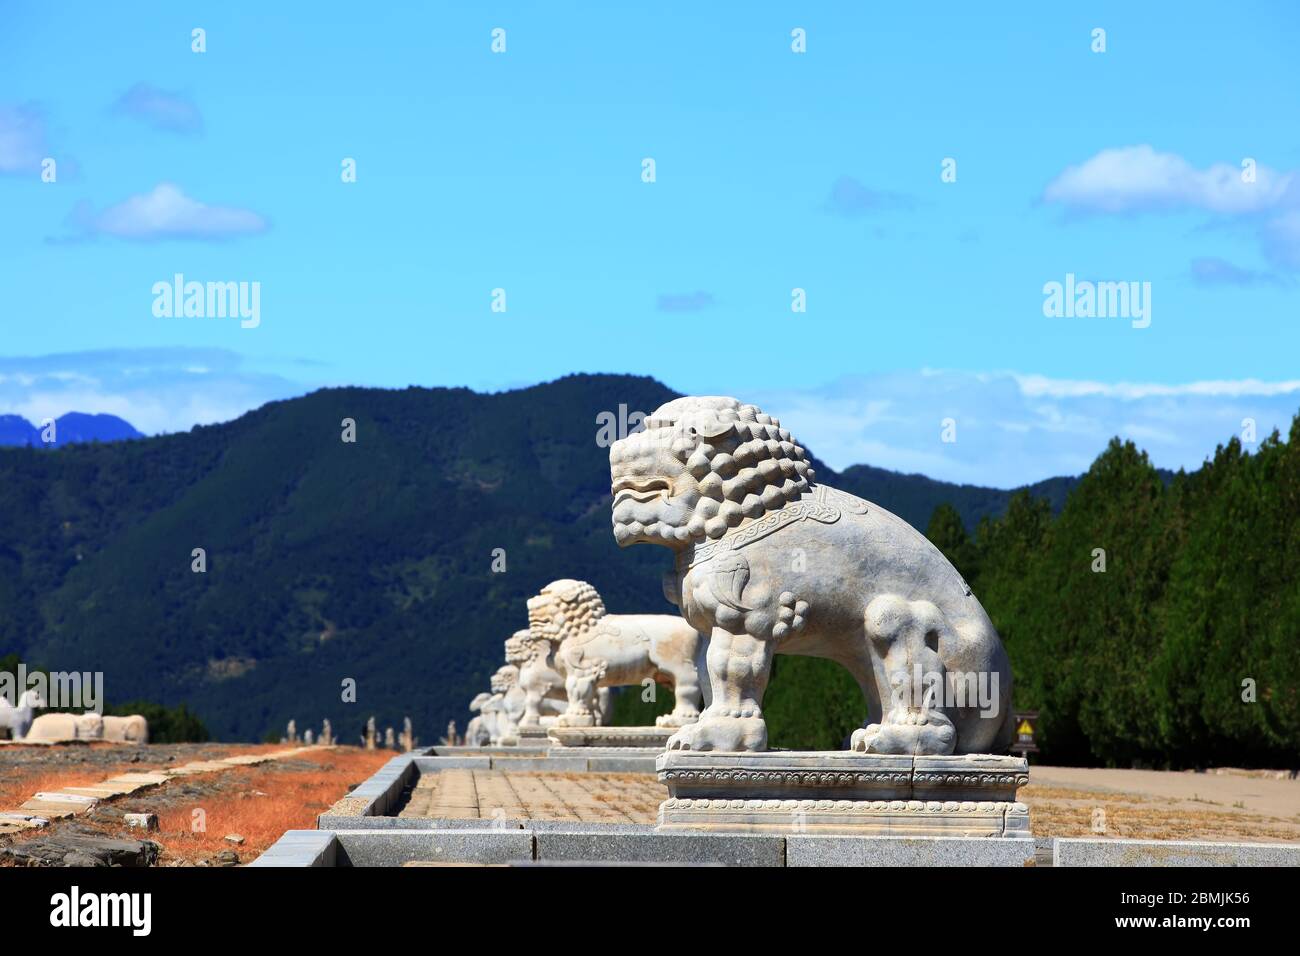 The ancient Chinese stone carving Stock Photo